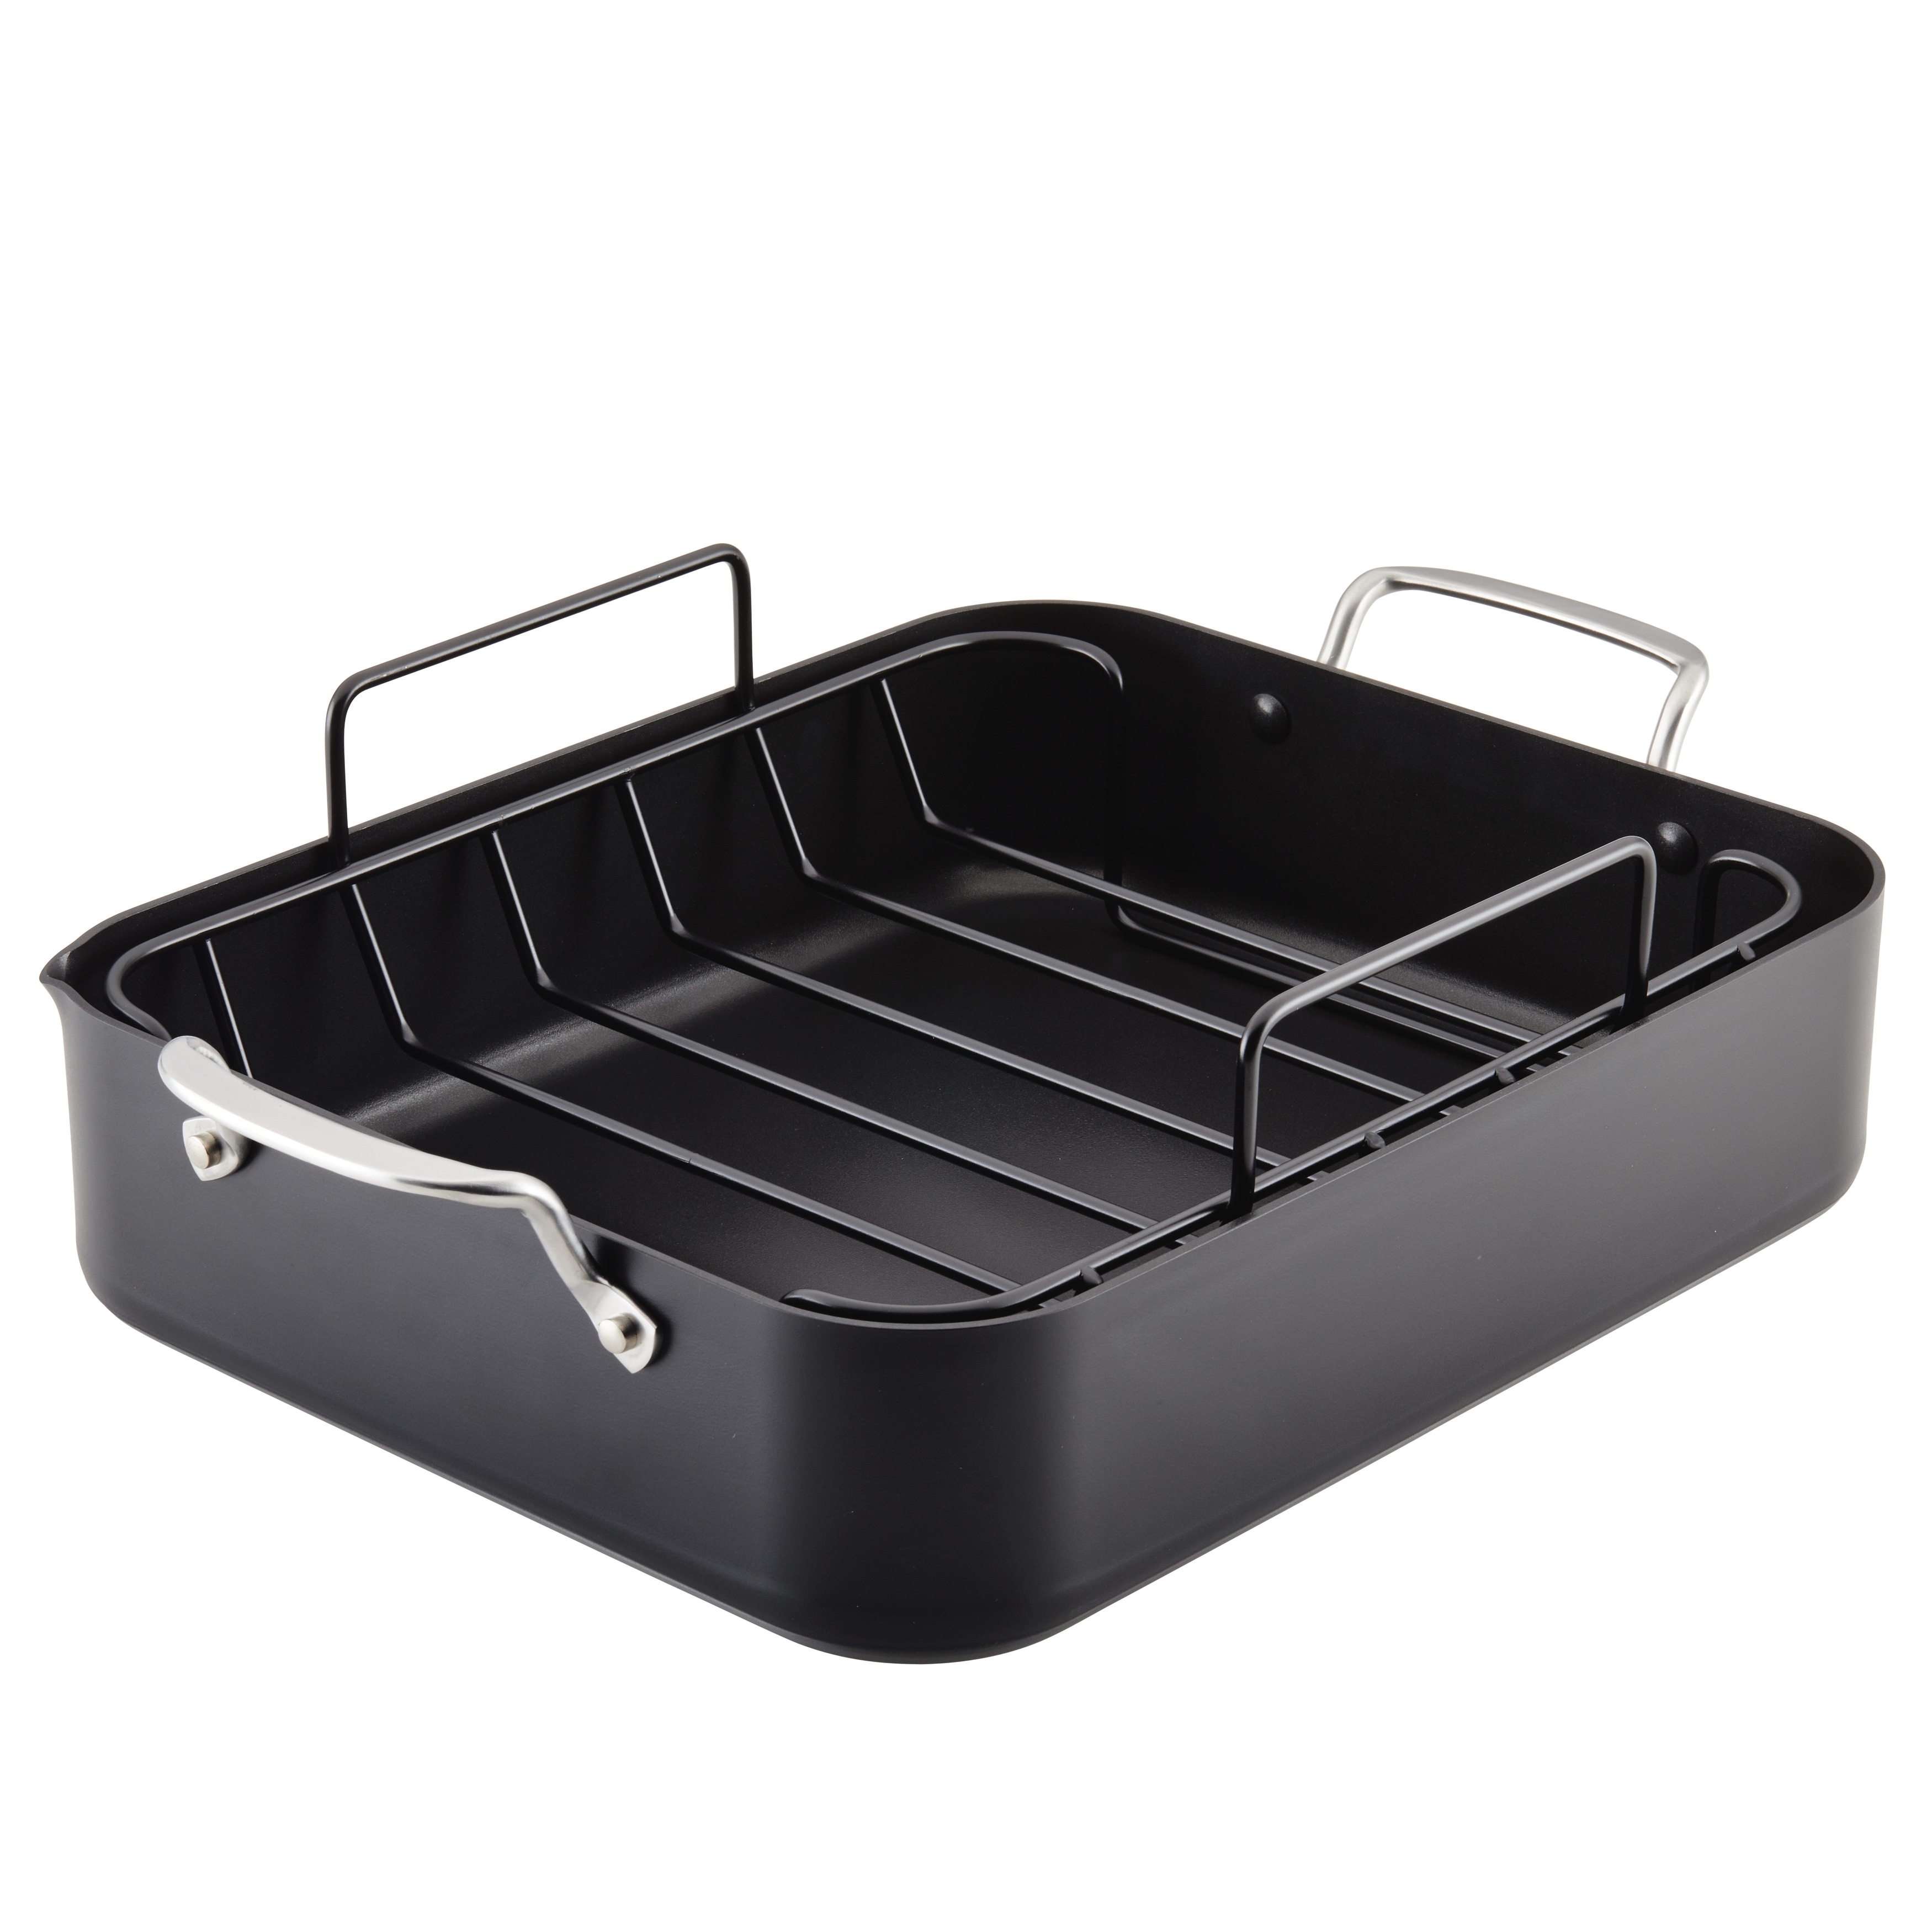 https://ak1.ostkcdn.com/images/products/is/images/direct/96e18676fd80ad4e5f299eeabe88b2d8495a42a1/KitchenAid-Hard-Anodized-Roaster-with-Removable-Nonstick-Rack%2C-13-Inch-x-15.75-Inch%2C-Matte-Black.jpg